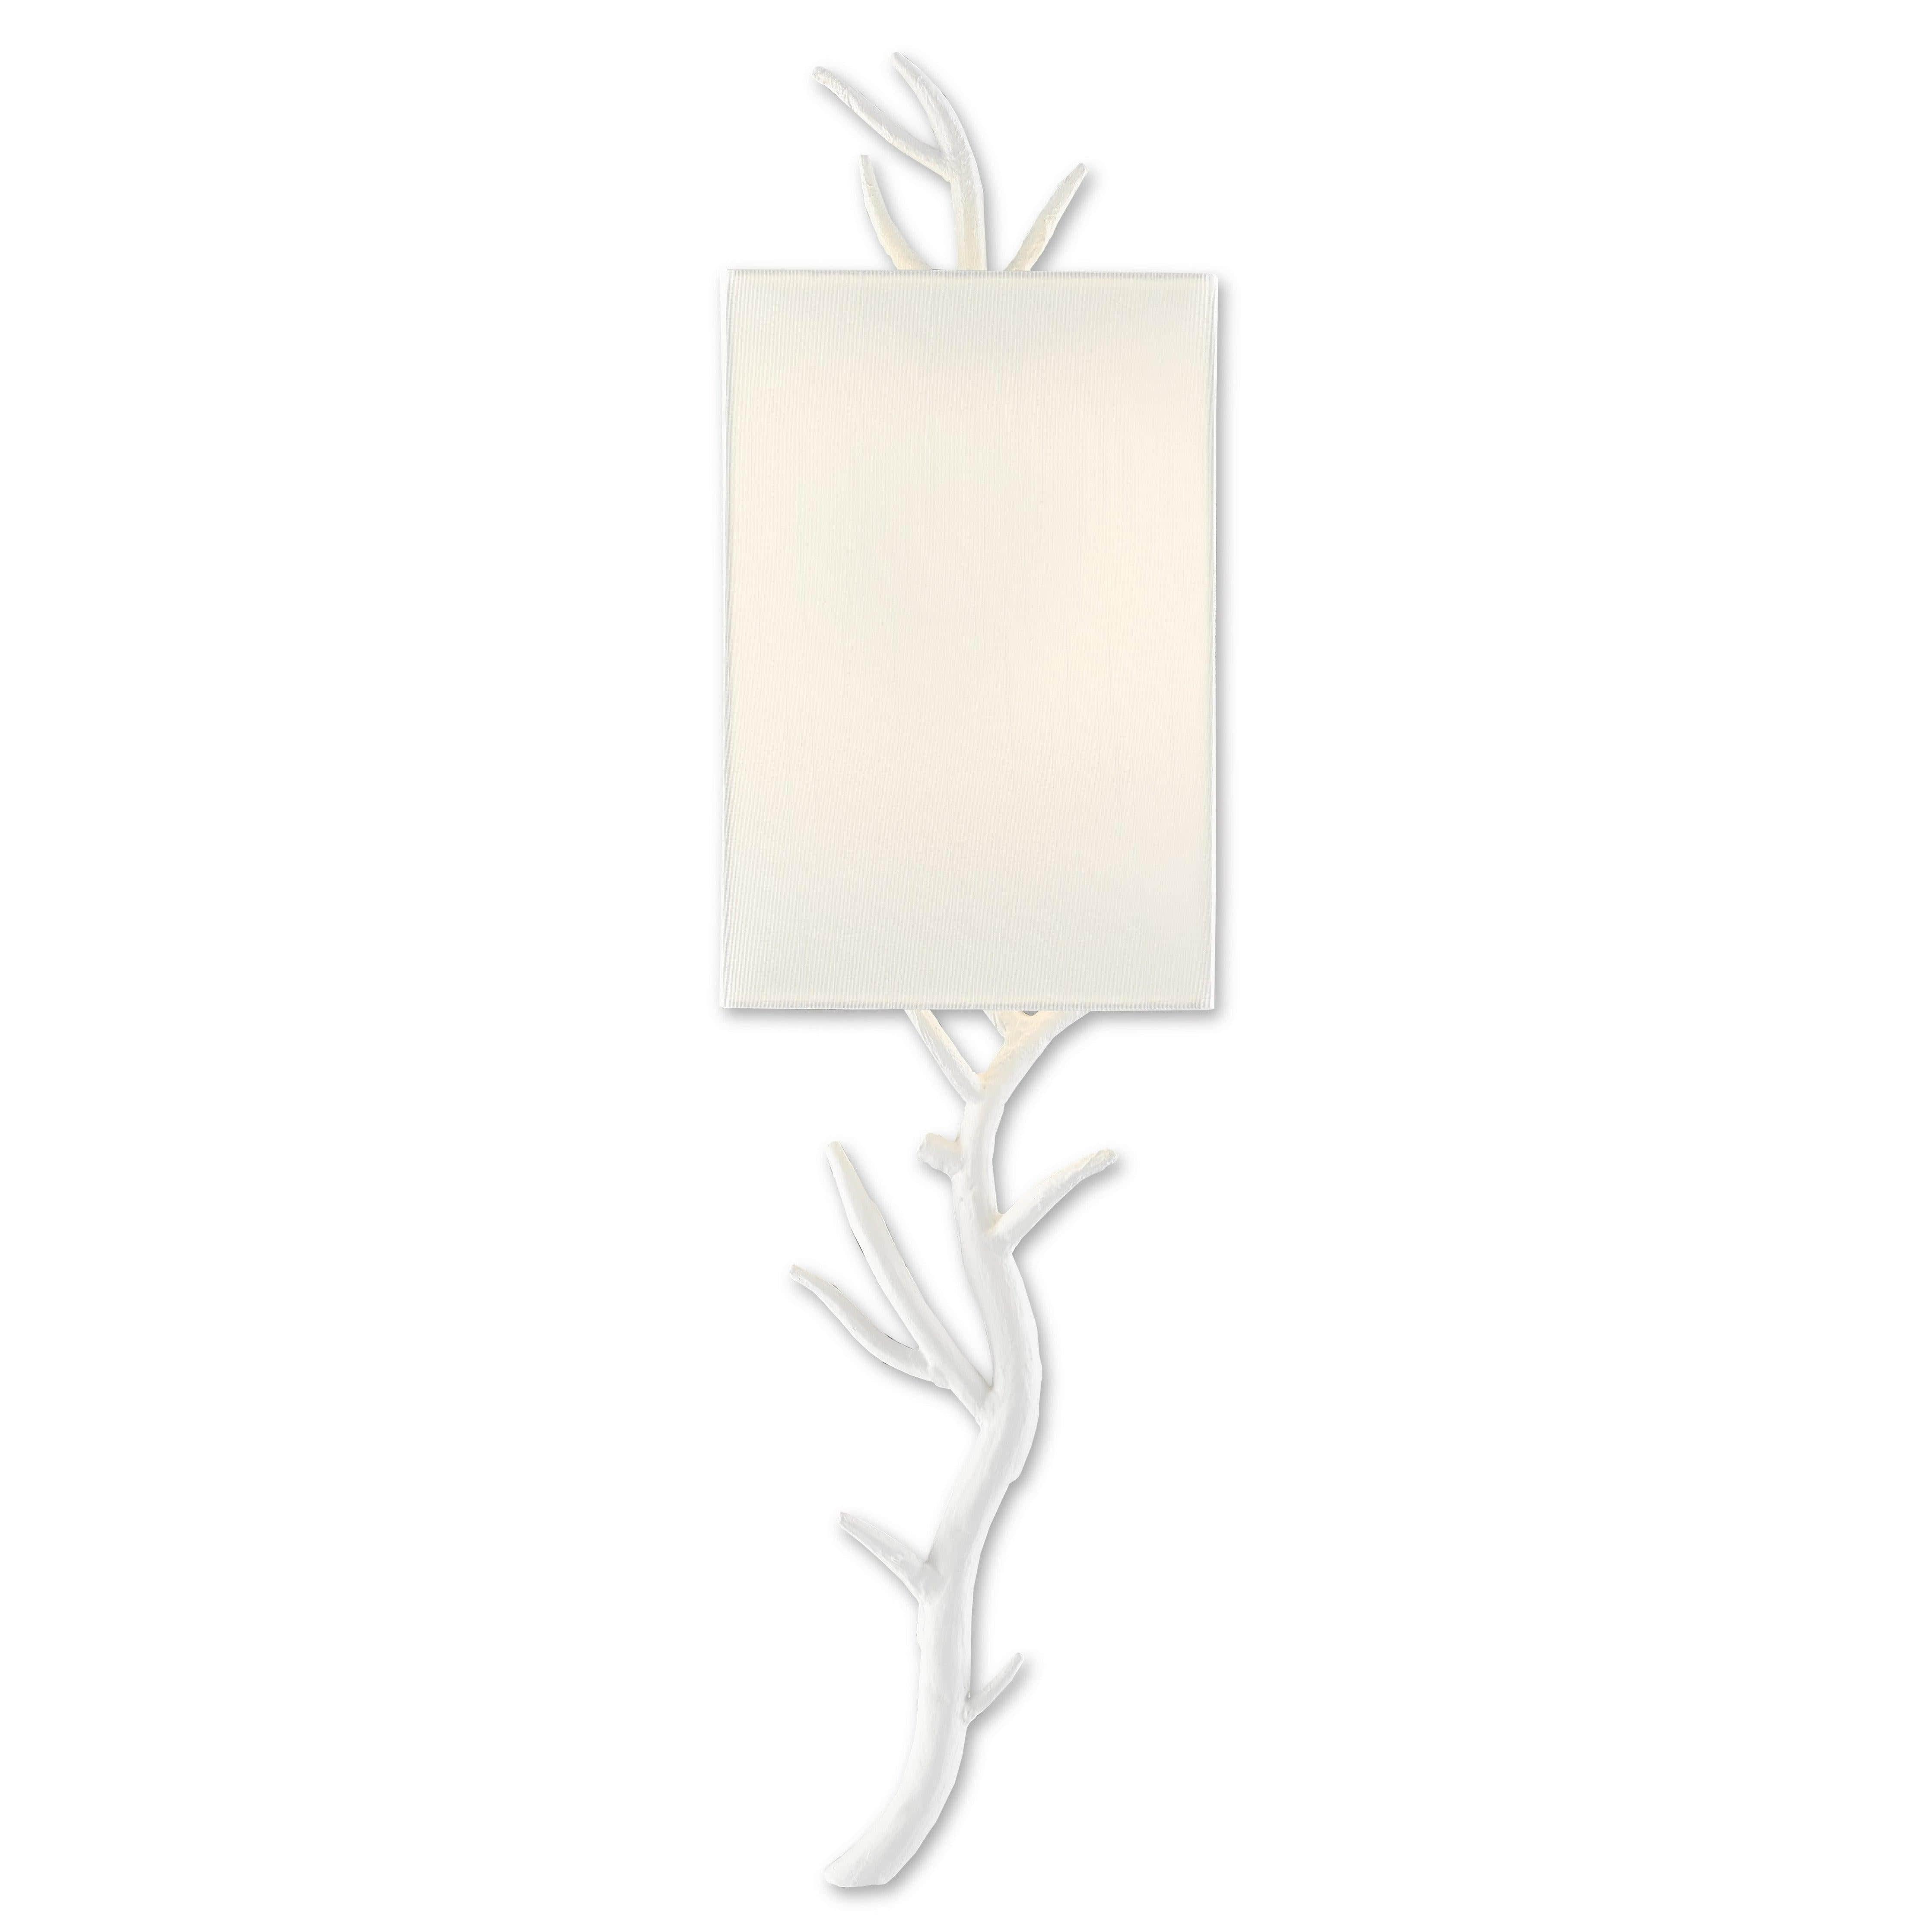 Currey and Company - Baneberry Wall Sconce - 5000-0148 | Montreal Lighting & Hardware